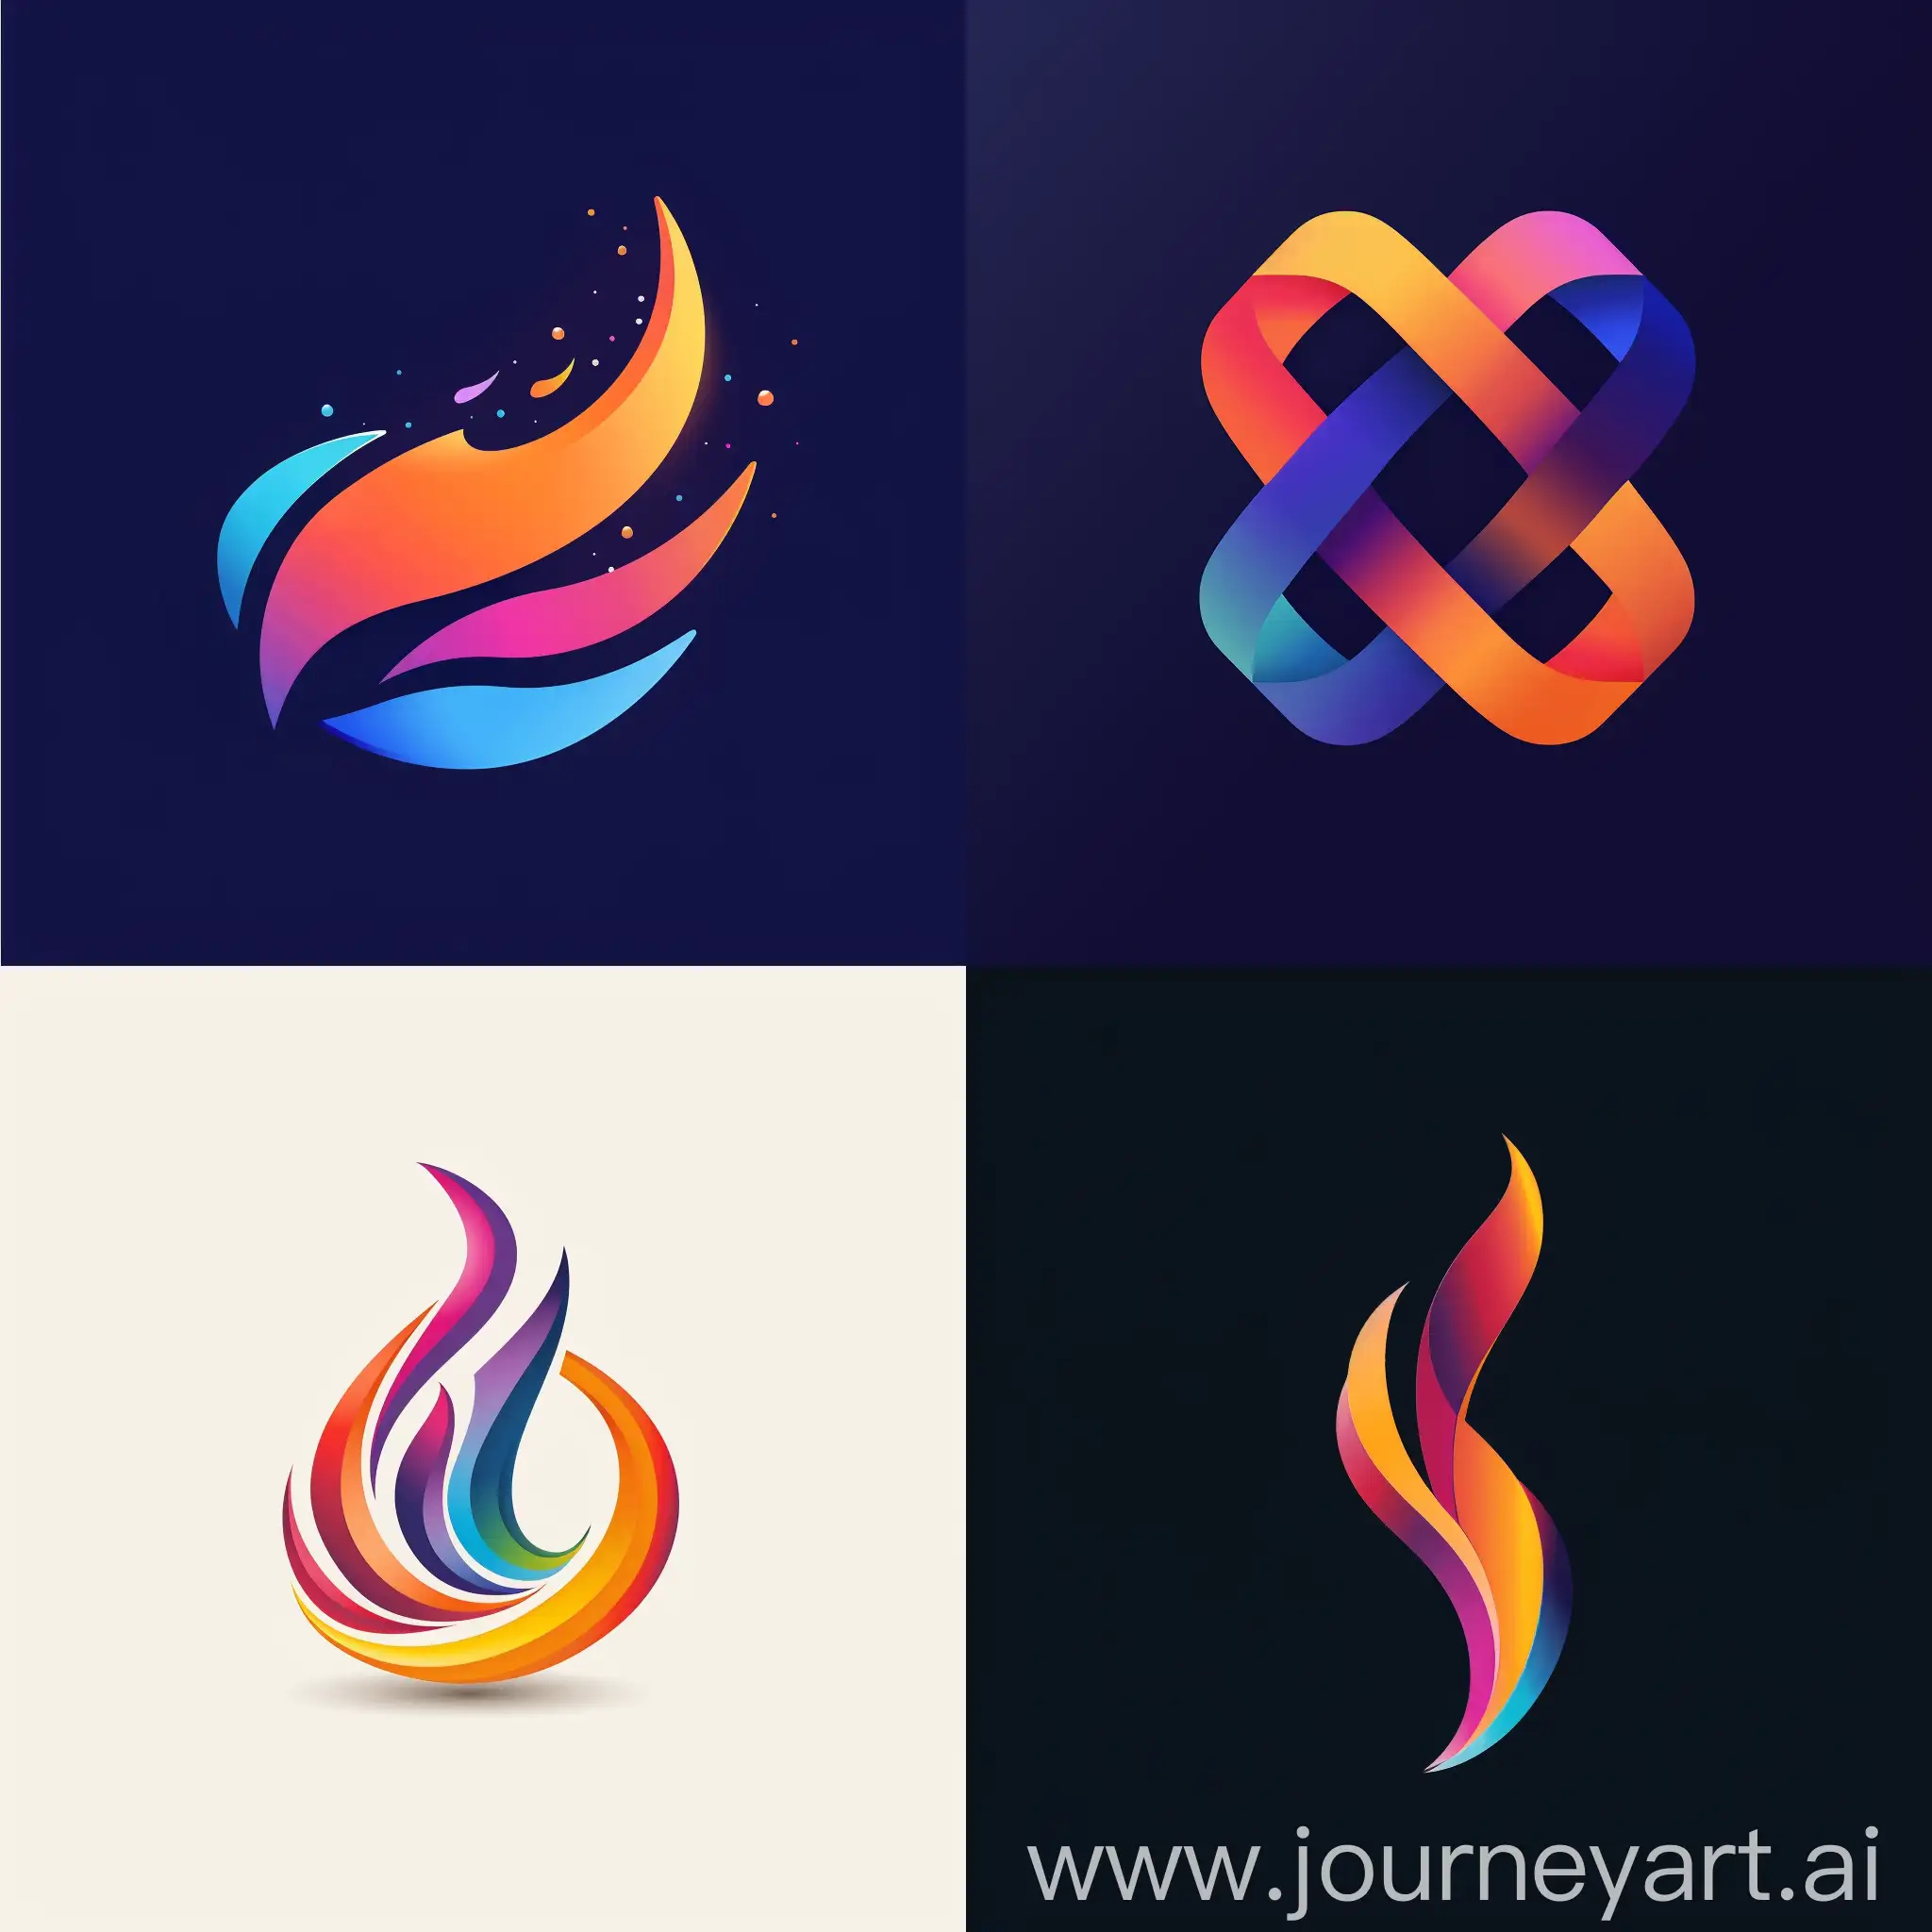 create a versatile and warm logo for a print-on-demand business, suitable for various niches, incorporating welcoming and vibrant colors with a sleek, adaptable design, embodying approachability and creativity, easy to recognize at small sizes --ar 1:1